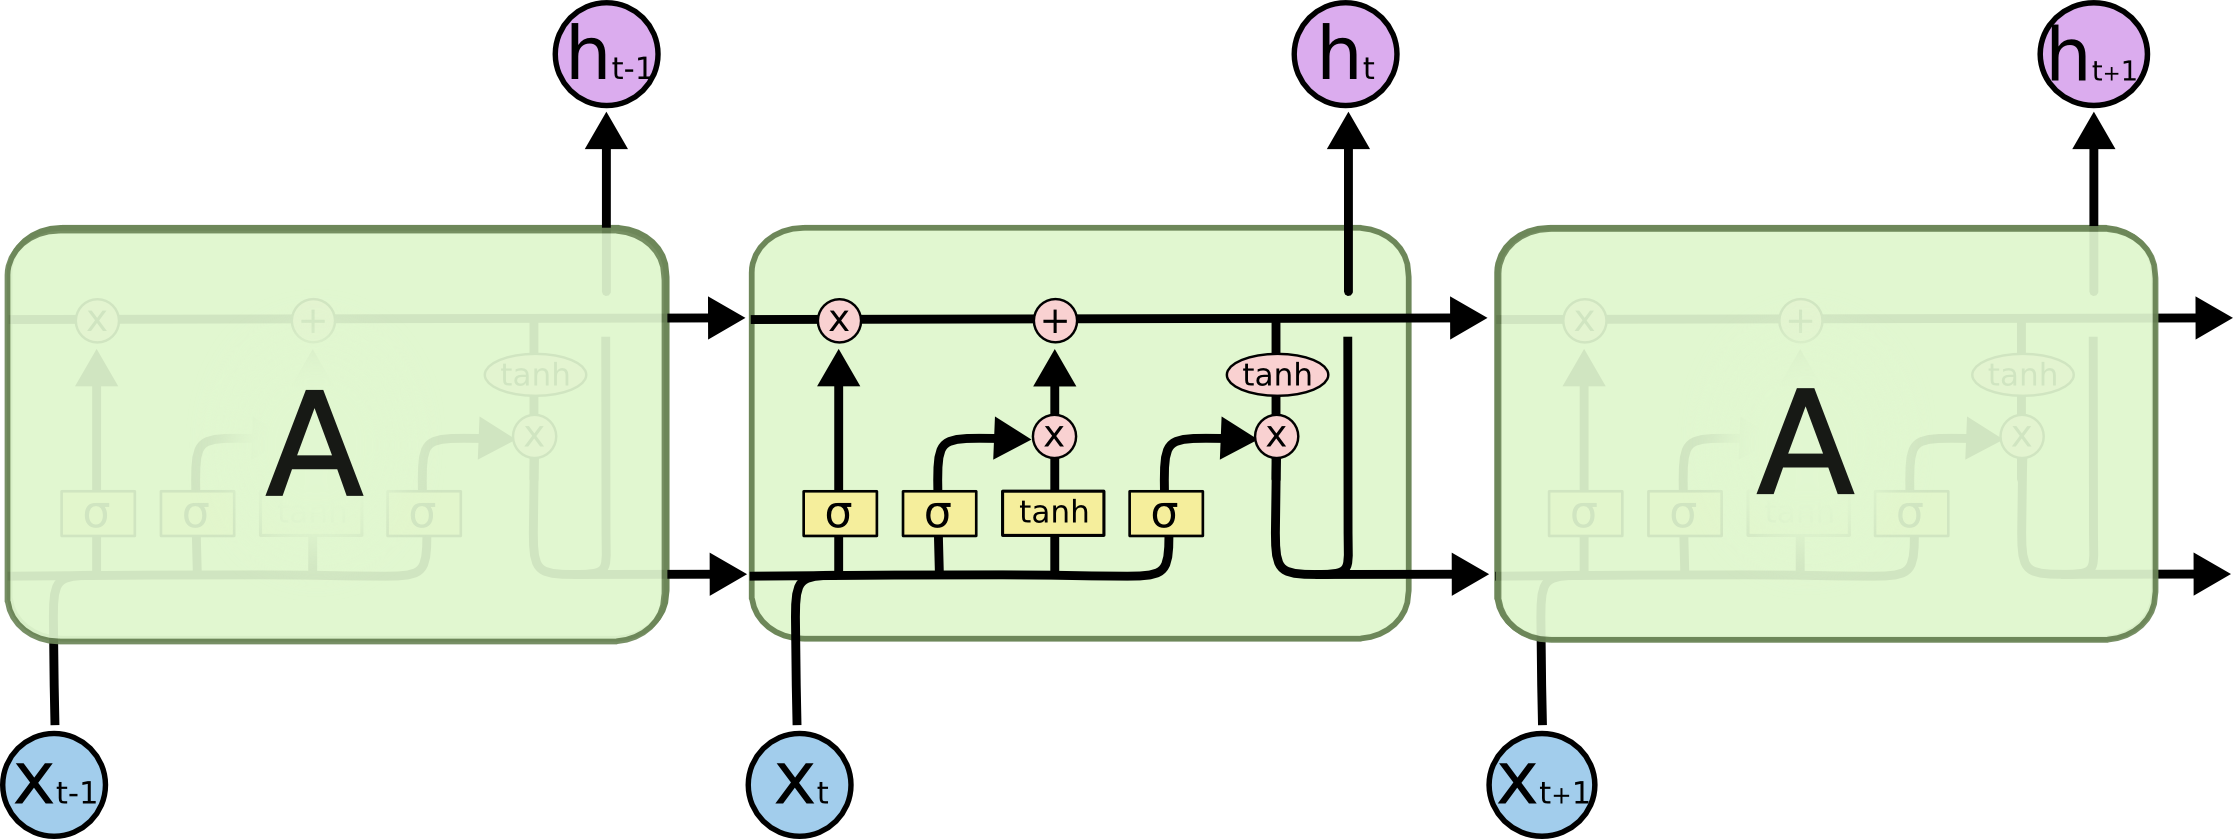 The repeating module in an LSTM contains four interacting layers